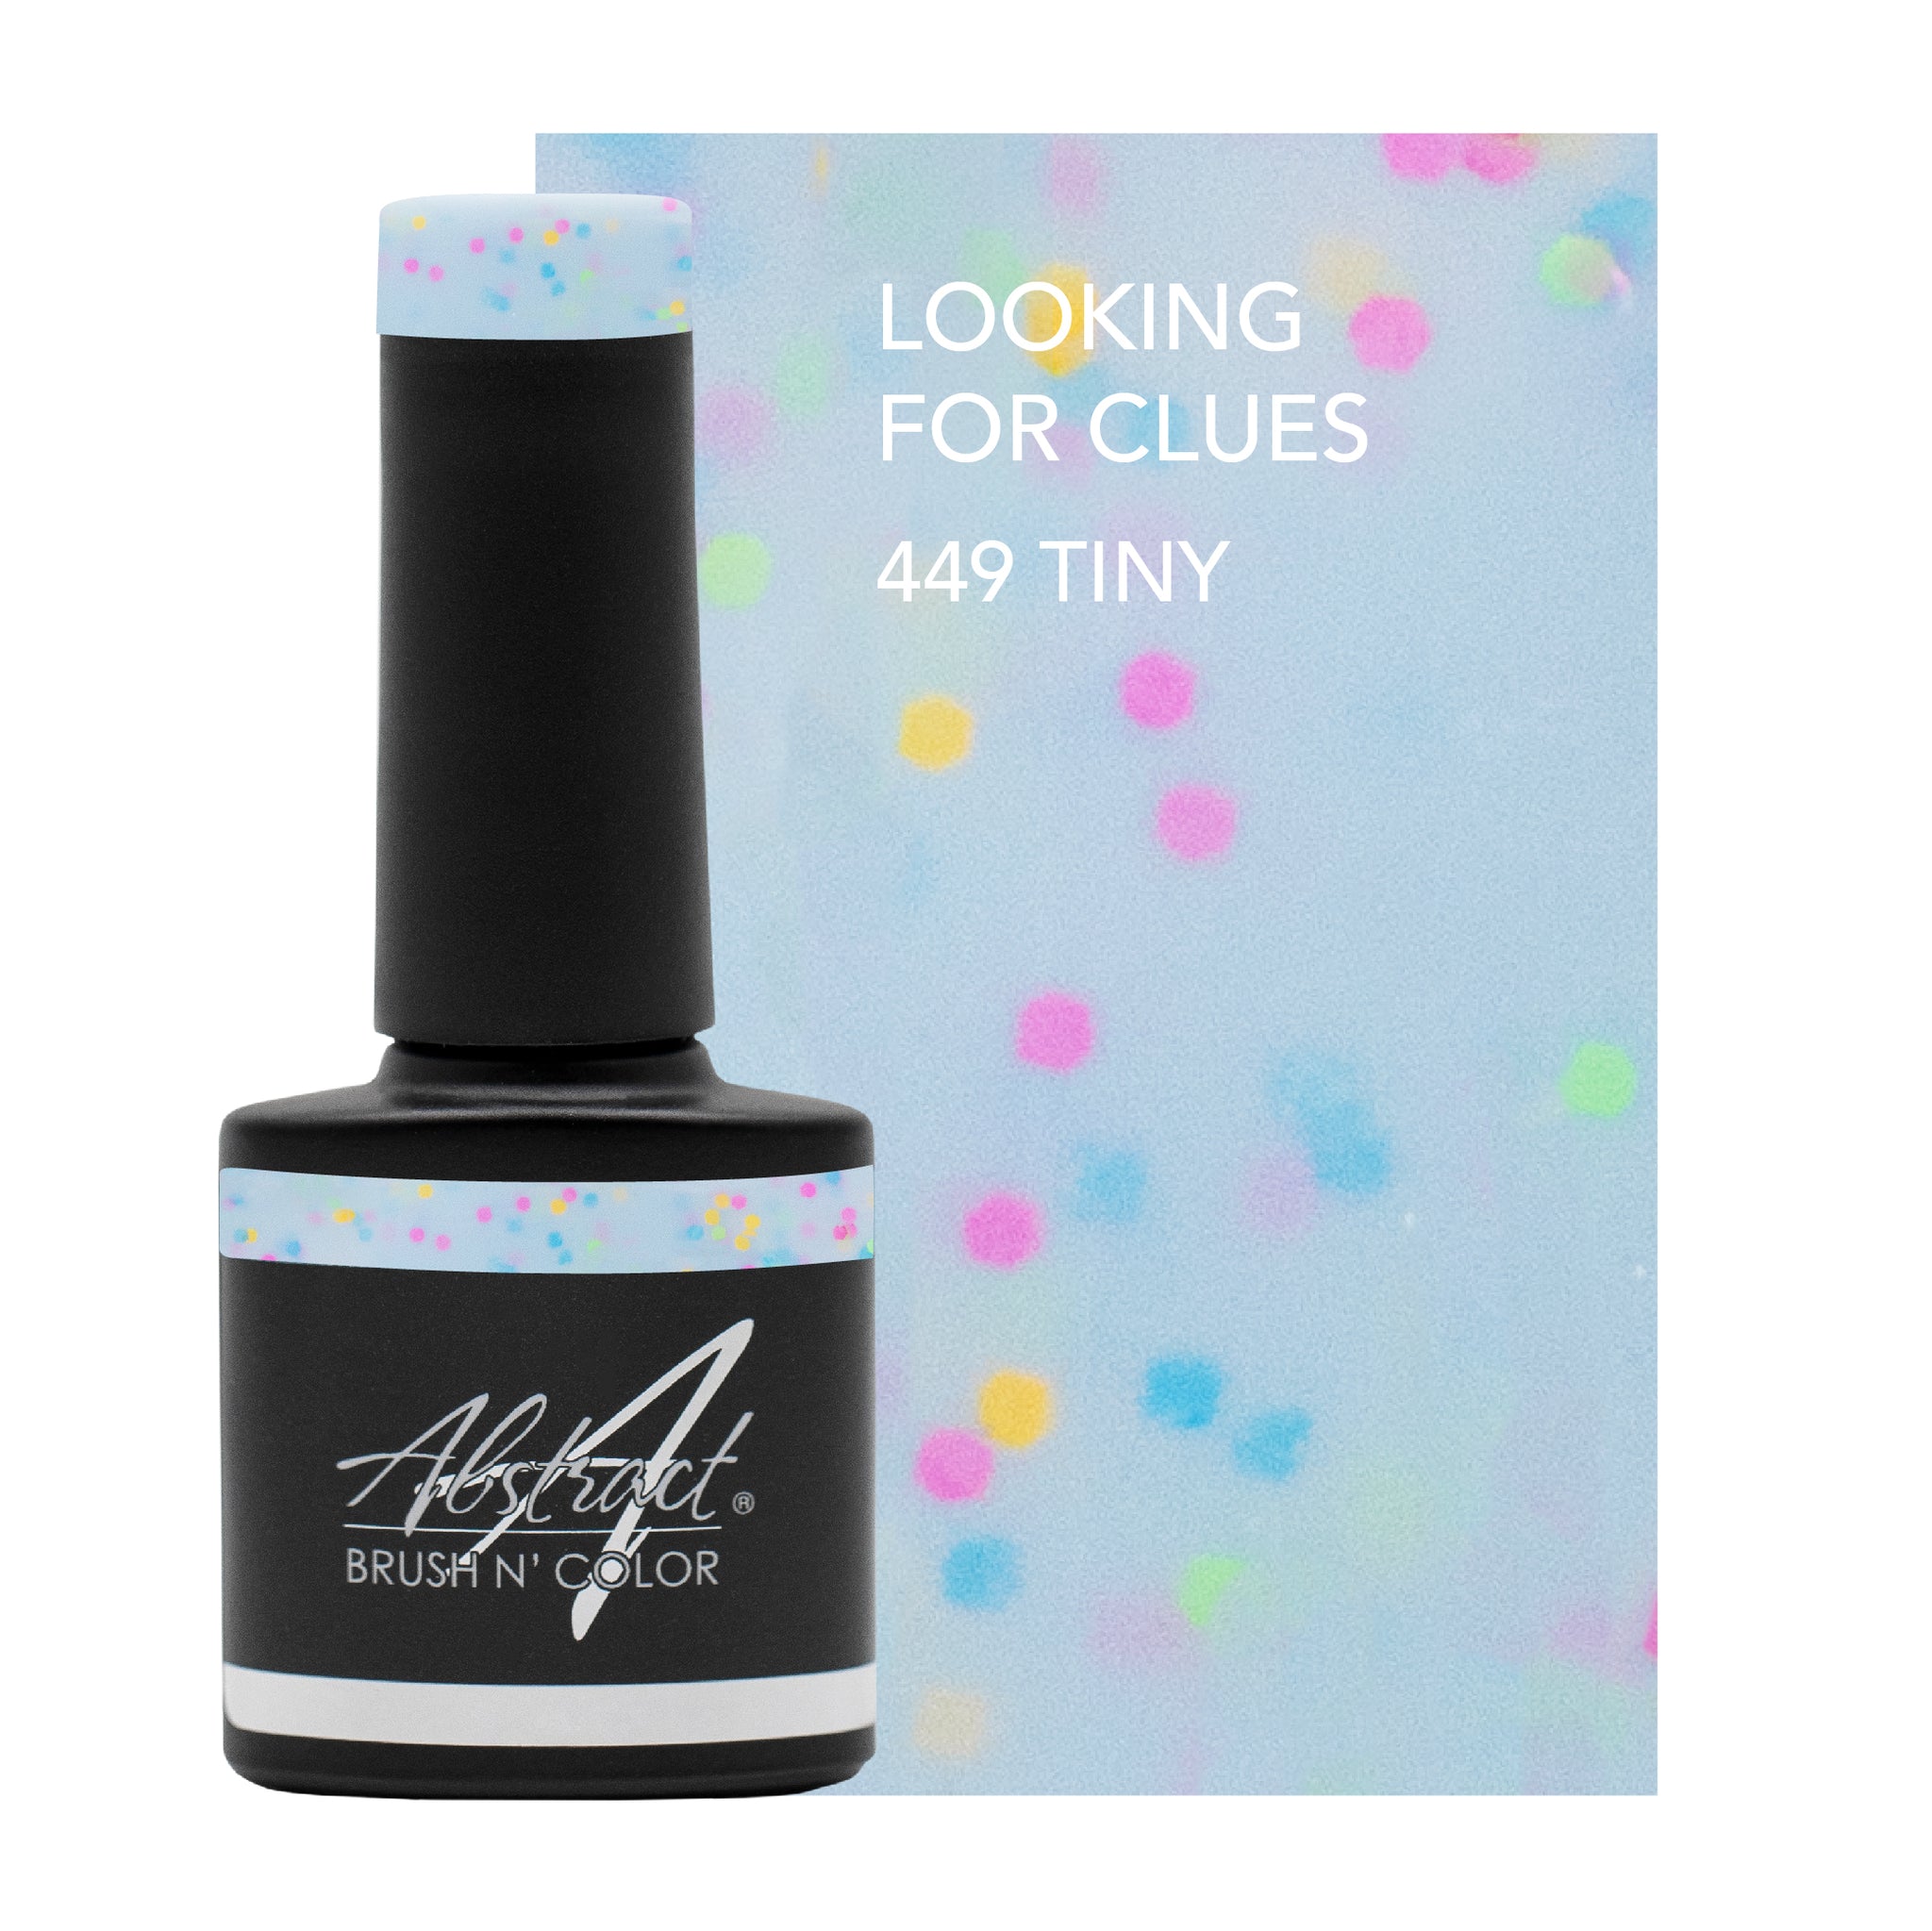 Looking For Clues Tiny 7,5ml